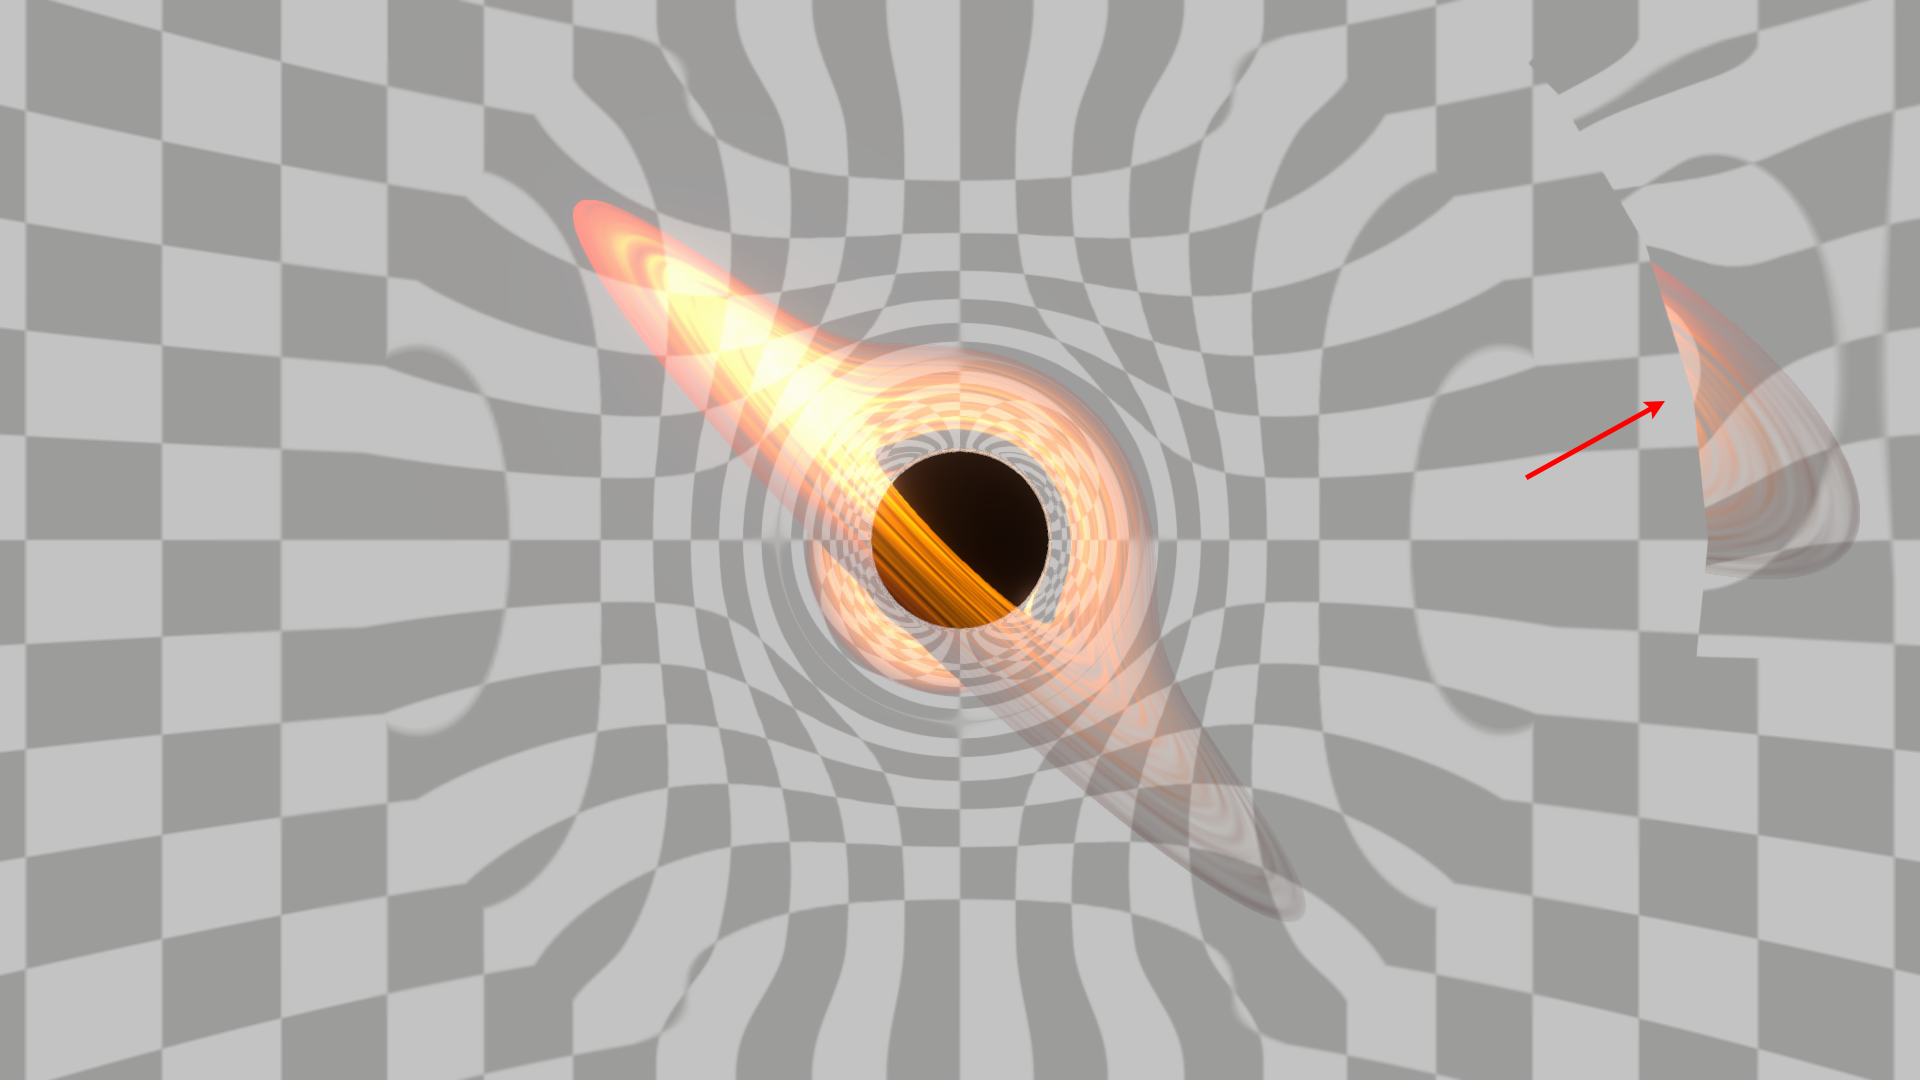 The second black hole you see to the right is clipped by the first.